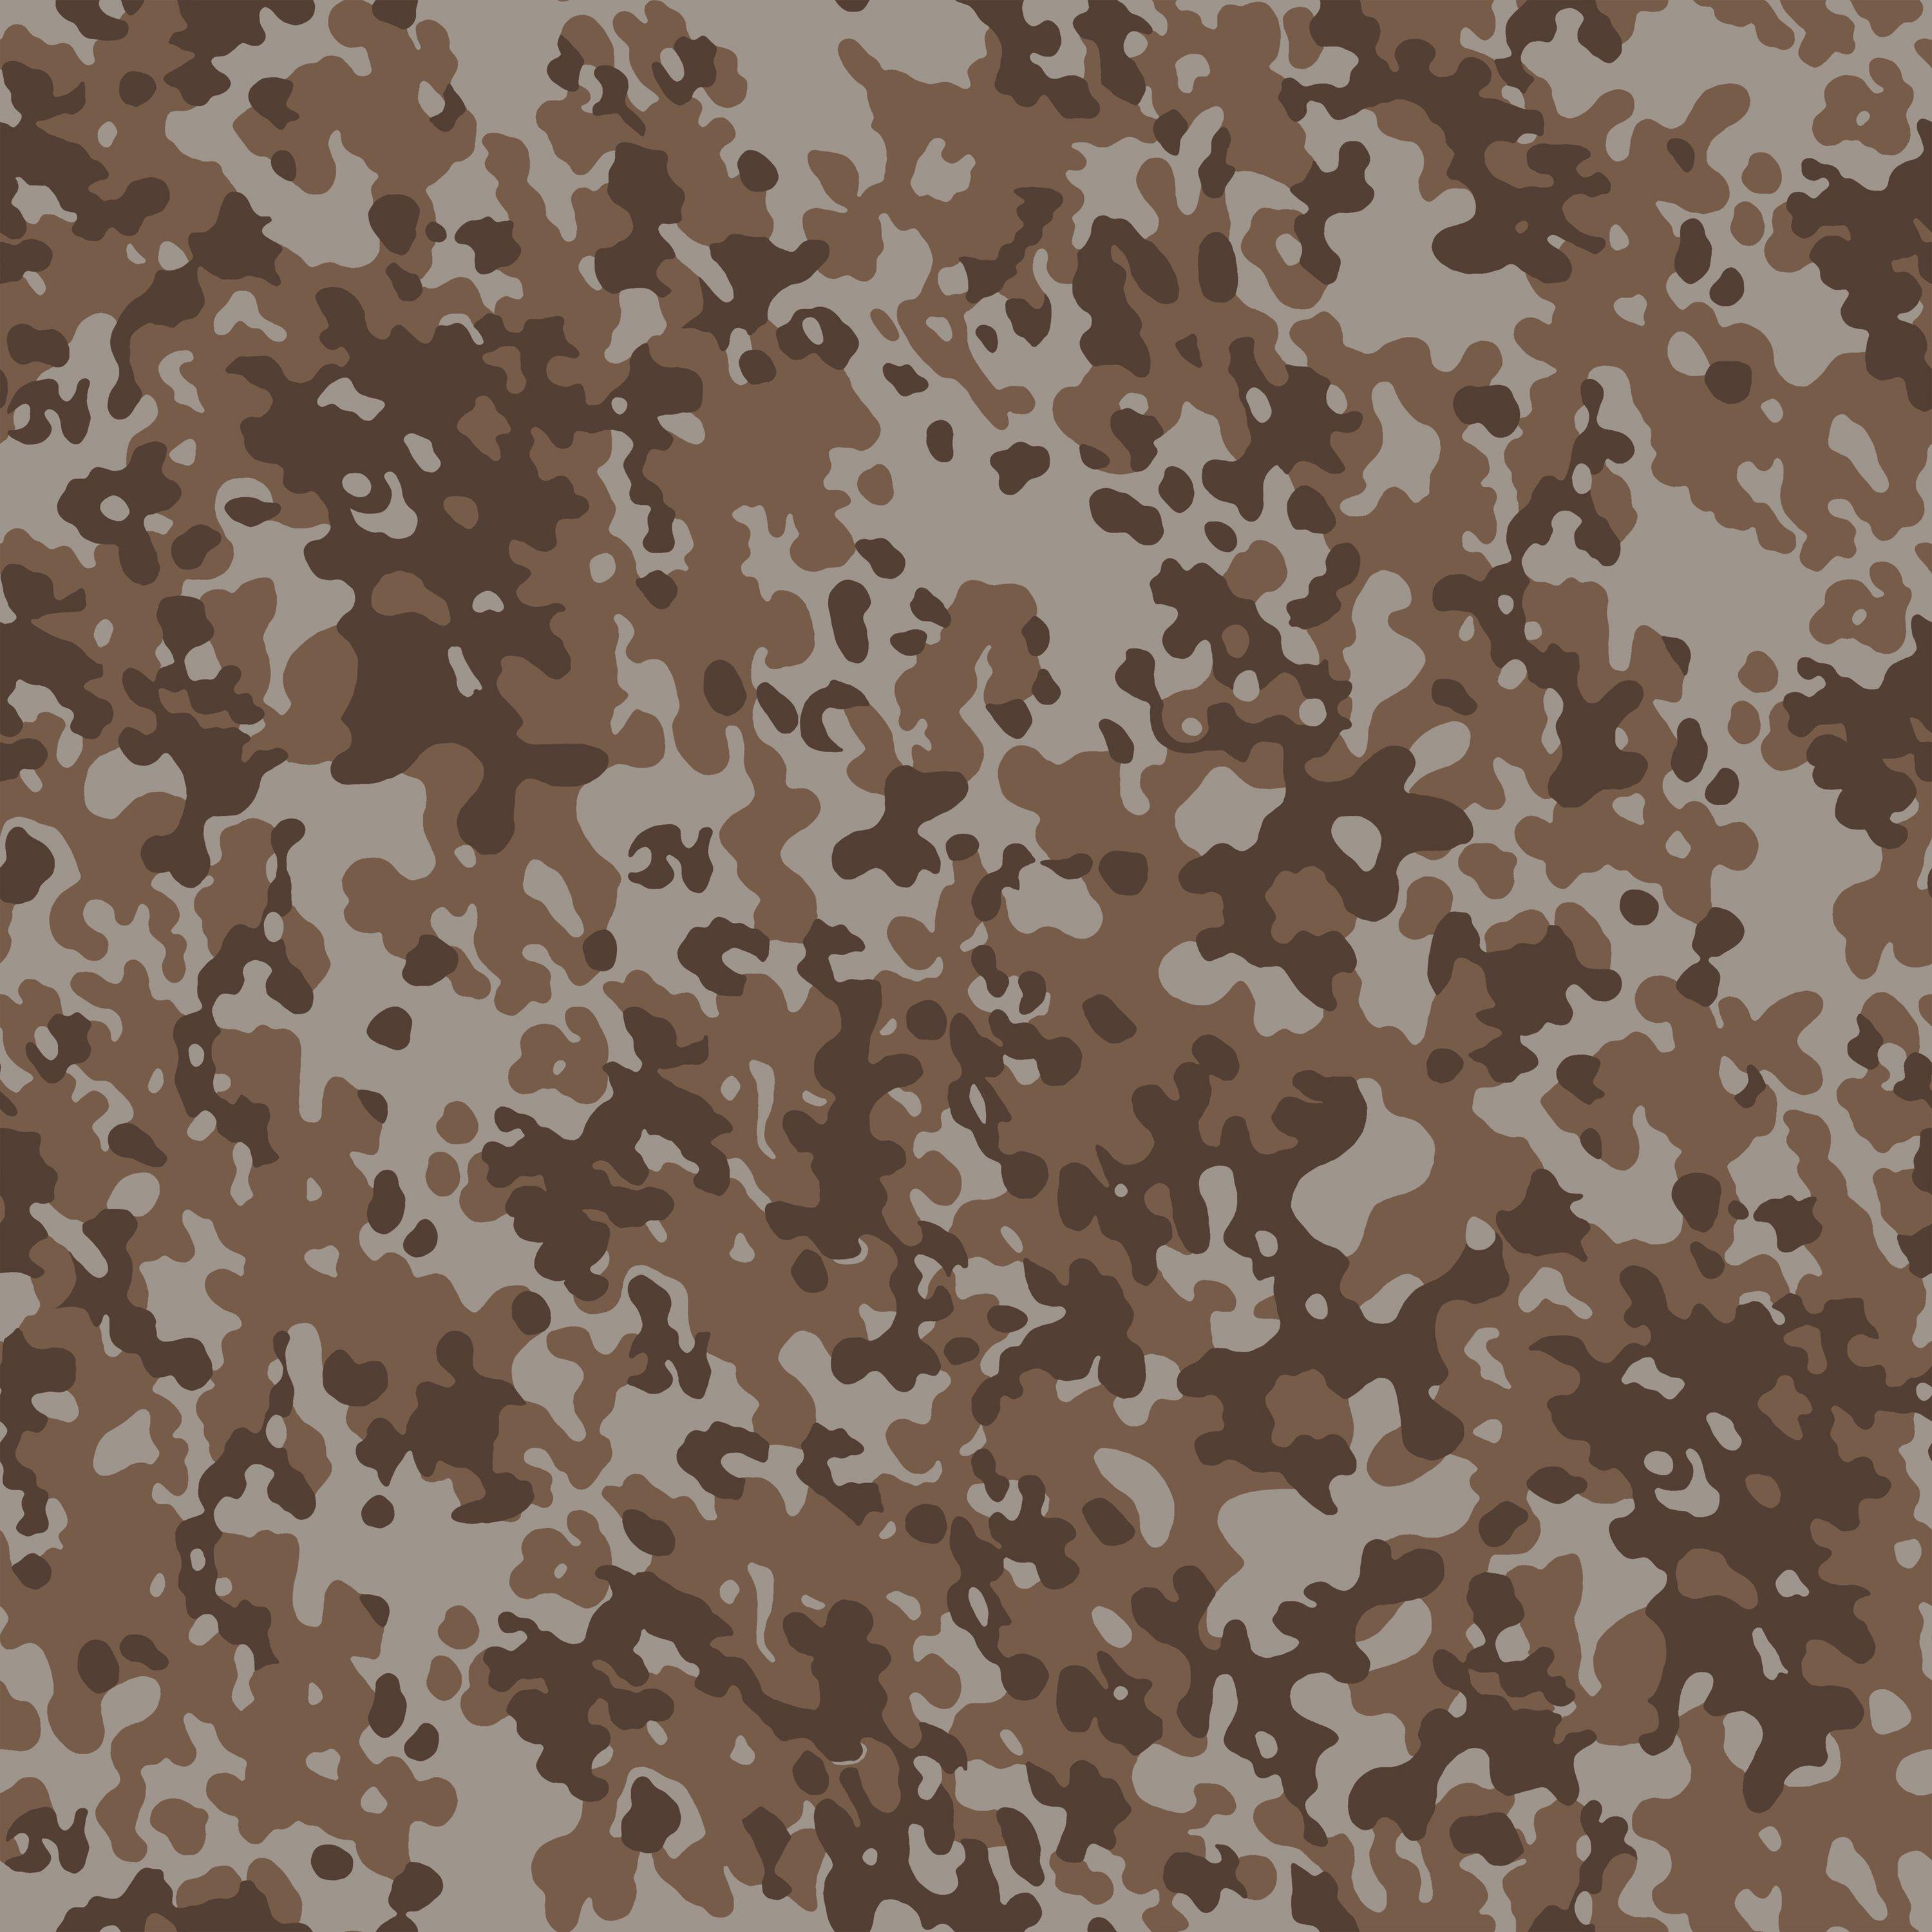 Camouflage texture, camouflage fabric, texture, camouflage, color